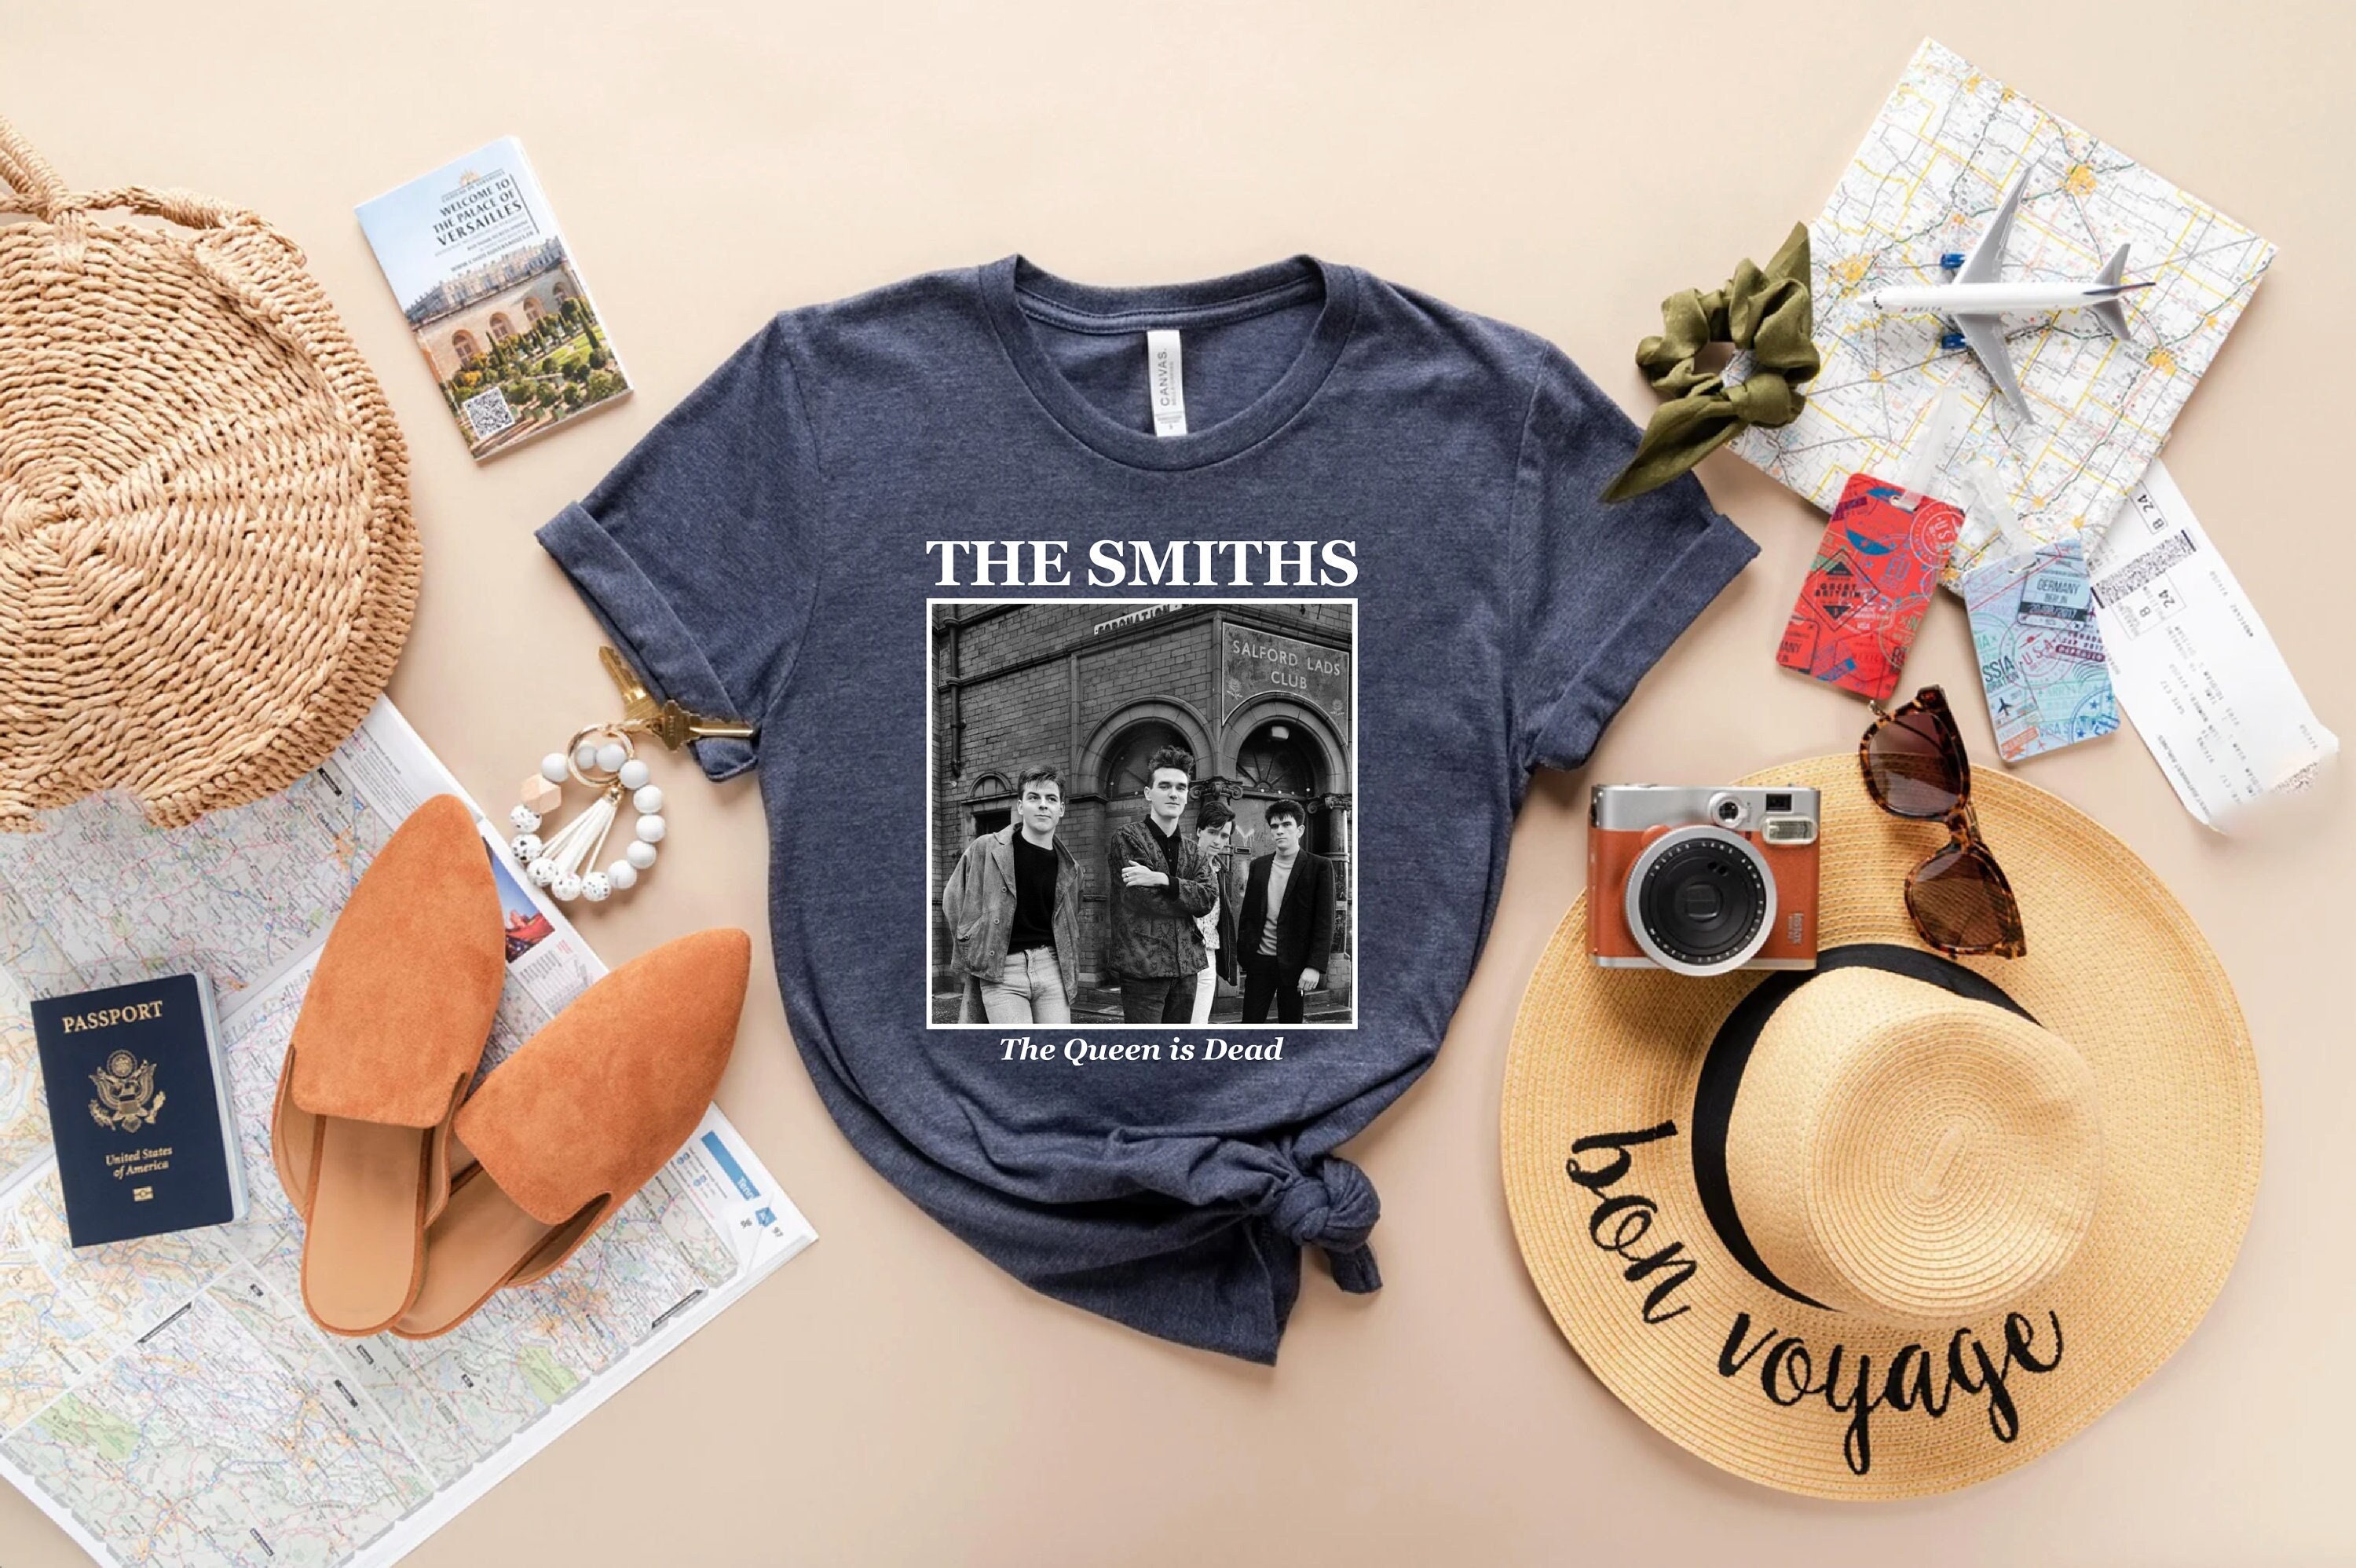 Discover The Smiths Shirt, The Smiths The Queen is Dead T-shirt